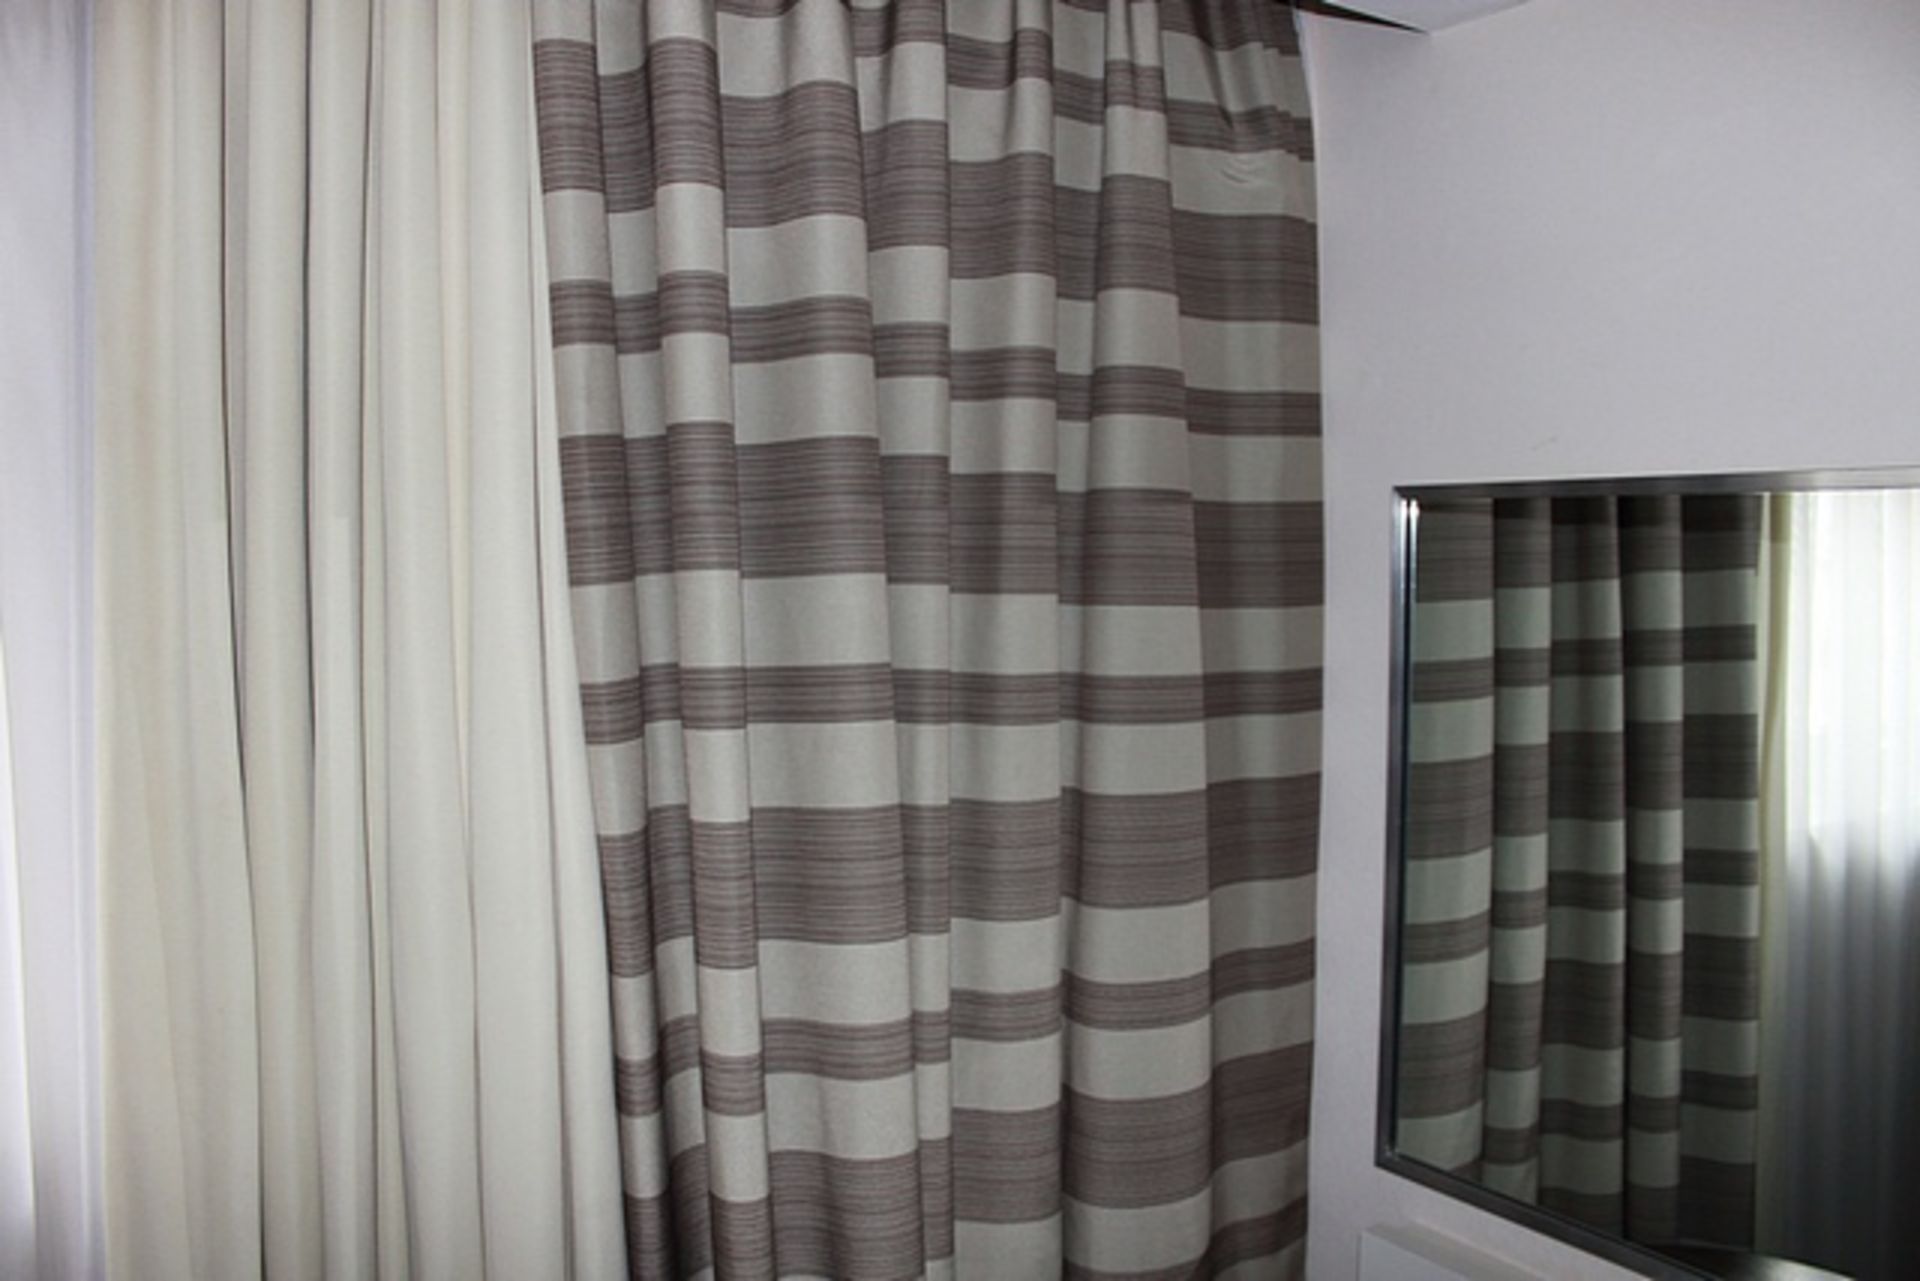 Sinclaire Fabrics a pair of drapes lined with blackout fabric spans 2000 x 2600mm (DB32AP1) - Image 3 of 4